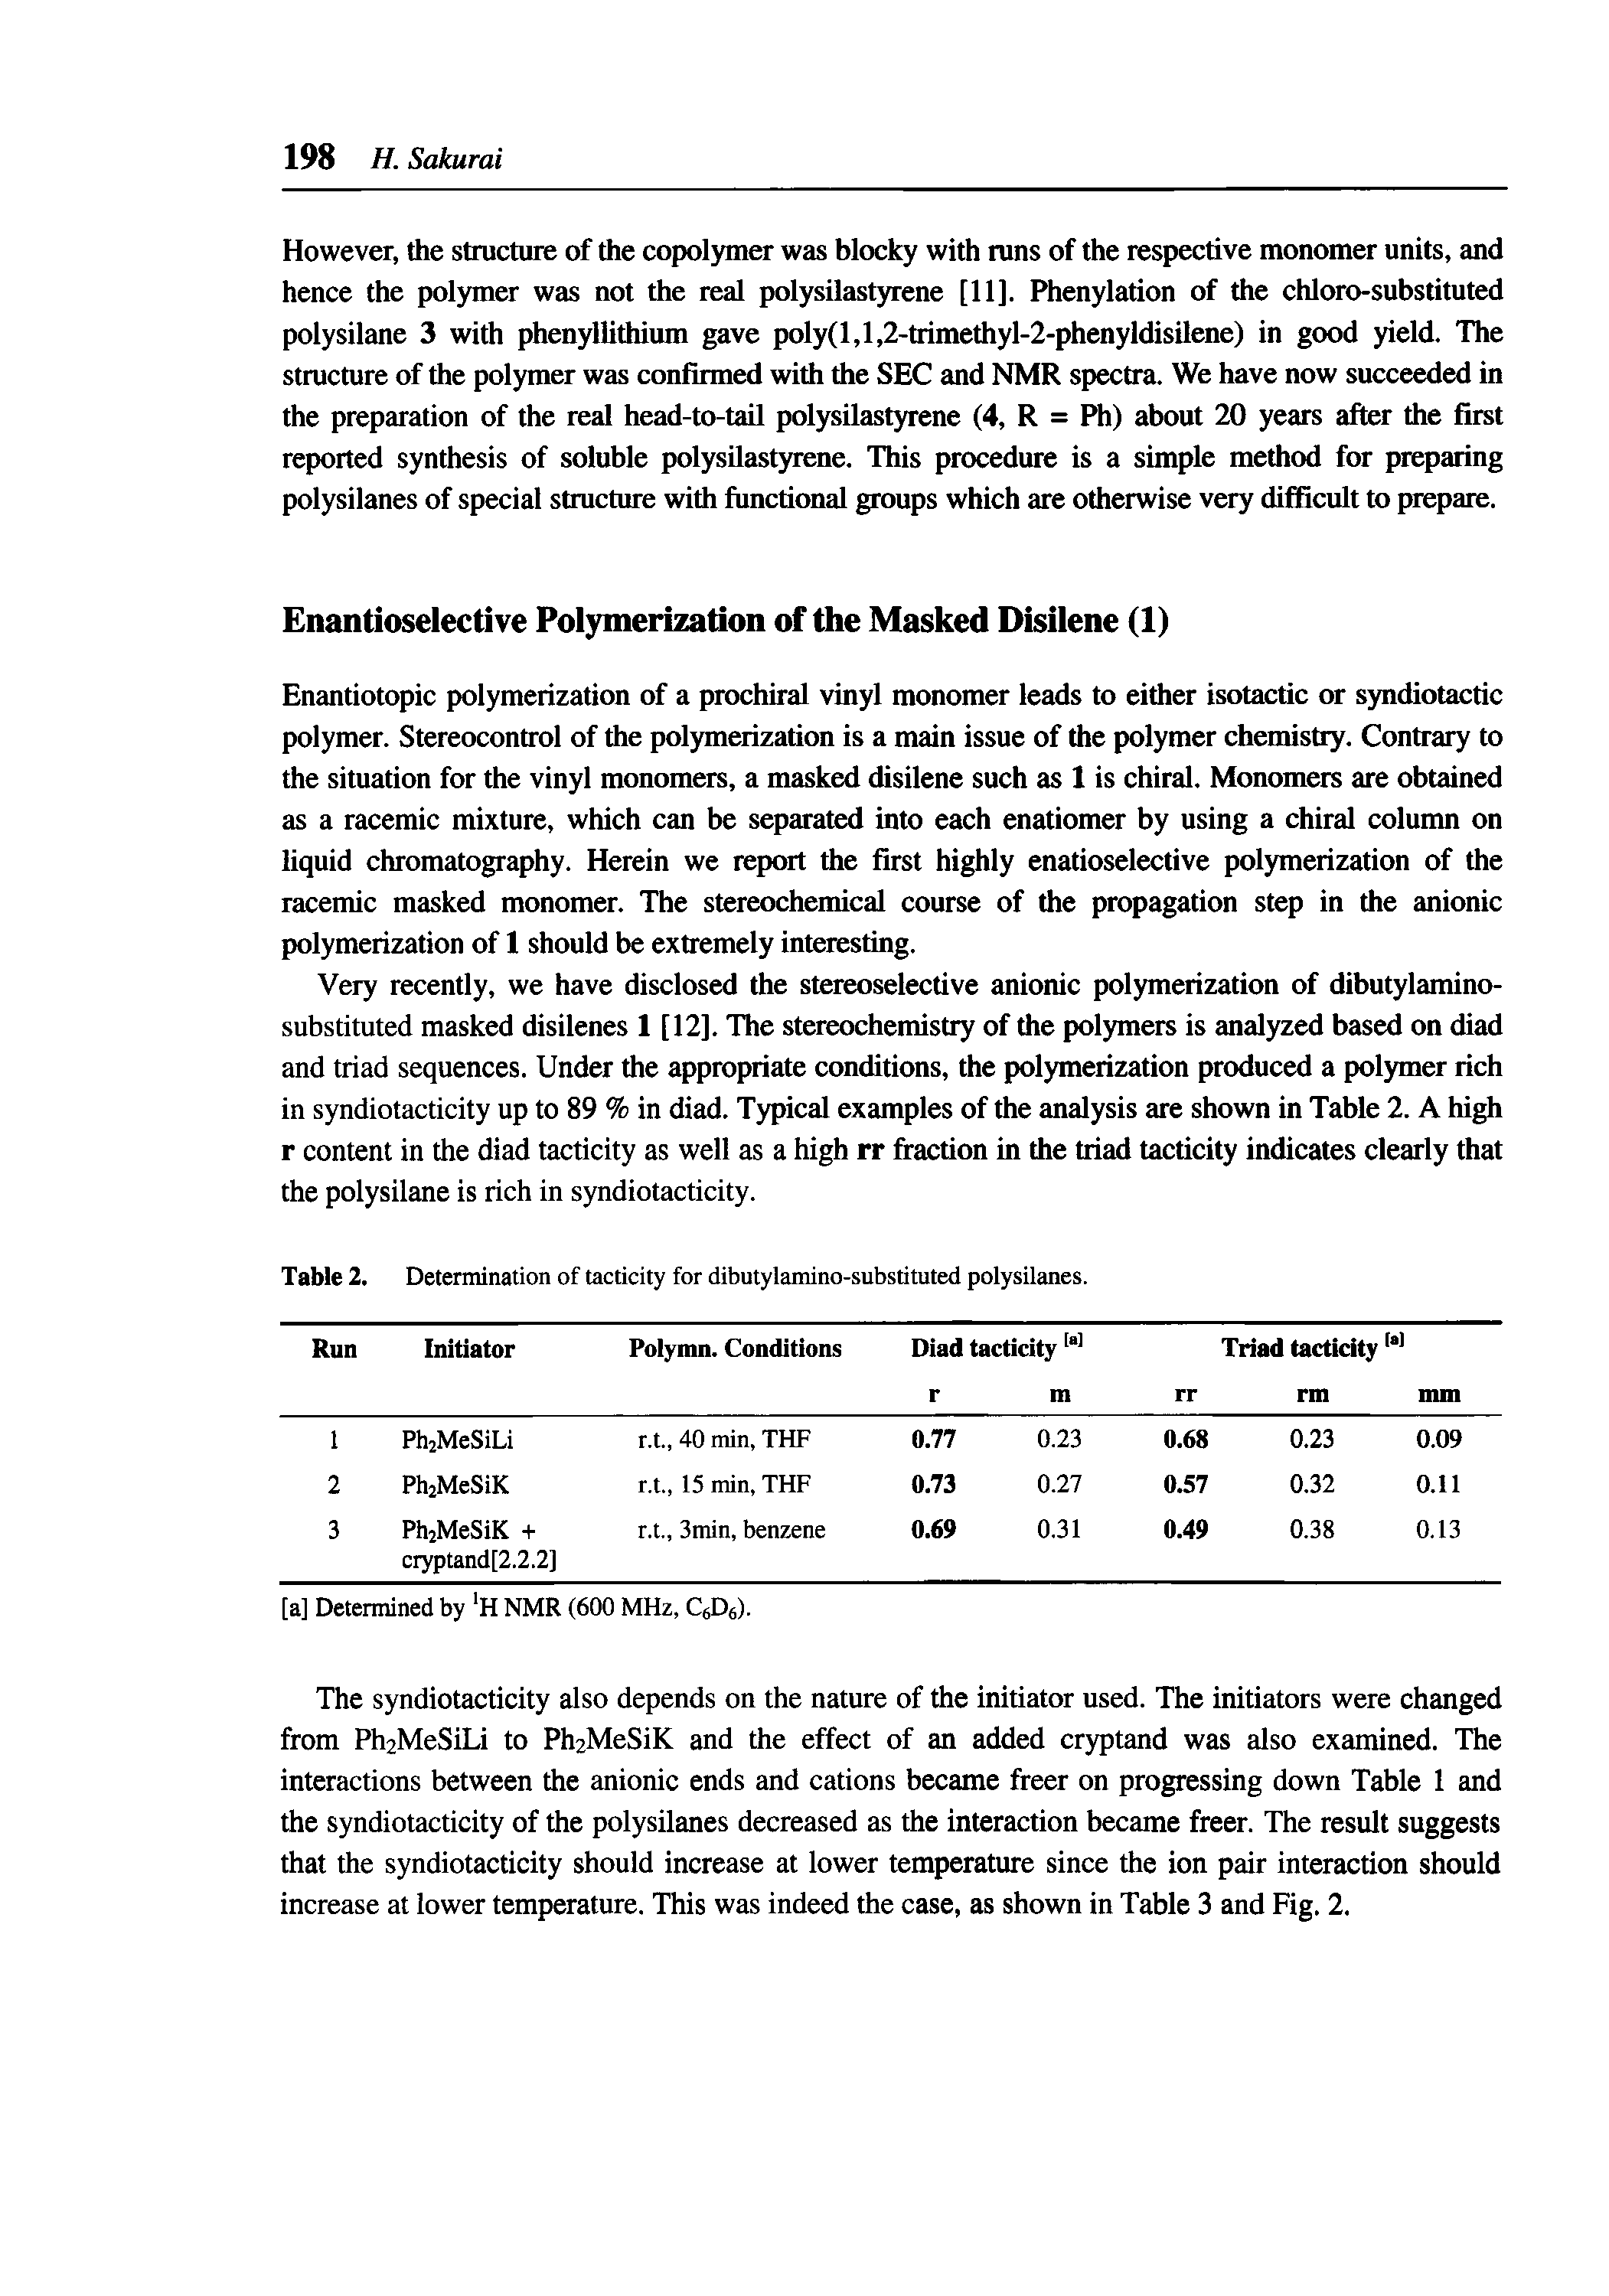 Table 2. Determination of tacticity for dibutylamino-substituted polysilanes.